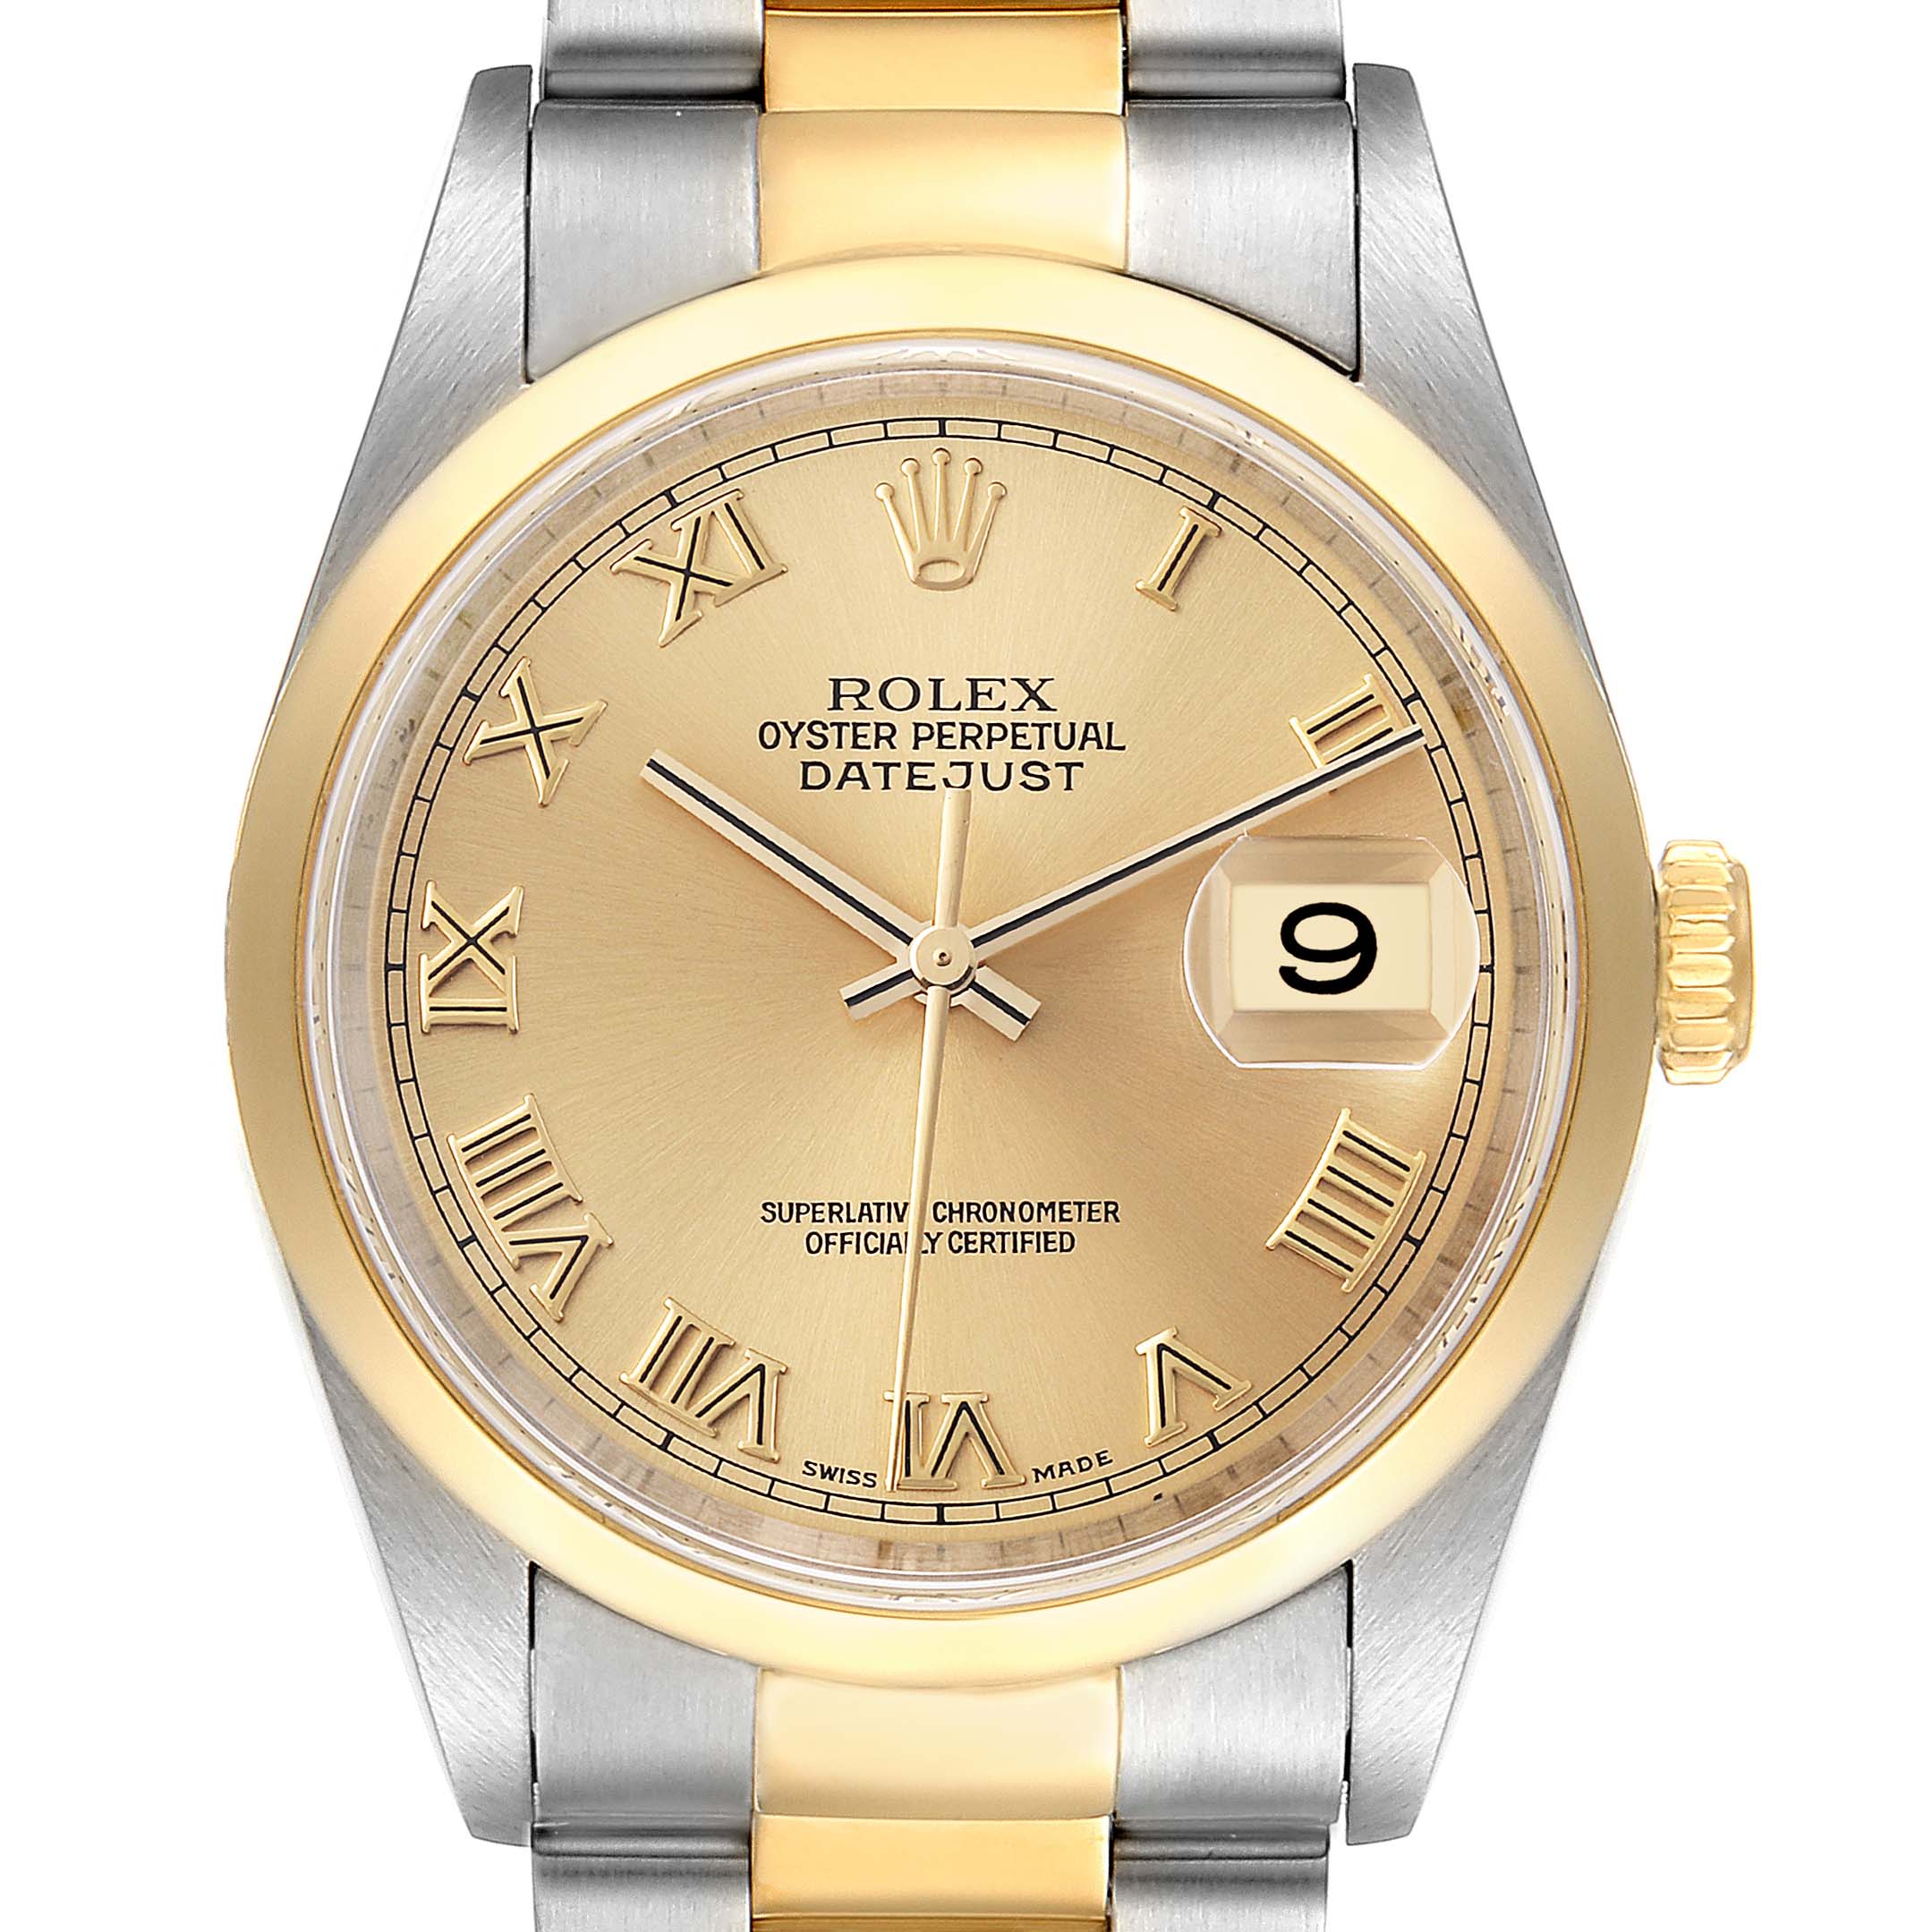 Rolex Datejust 36mm Yellow Gold and Stainless Steel Bracelet Royal